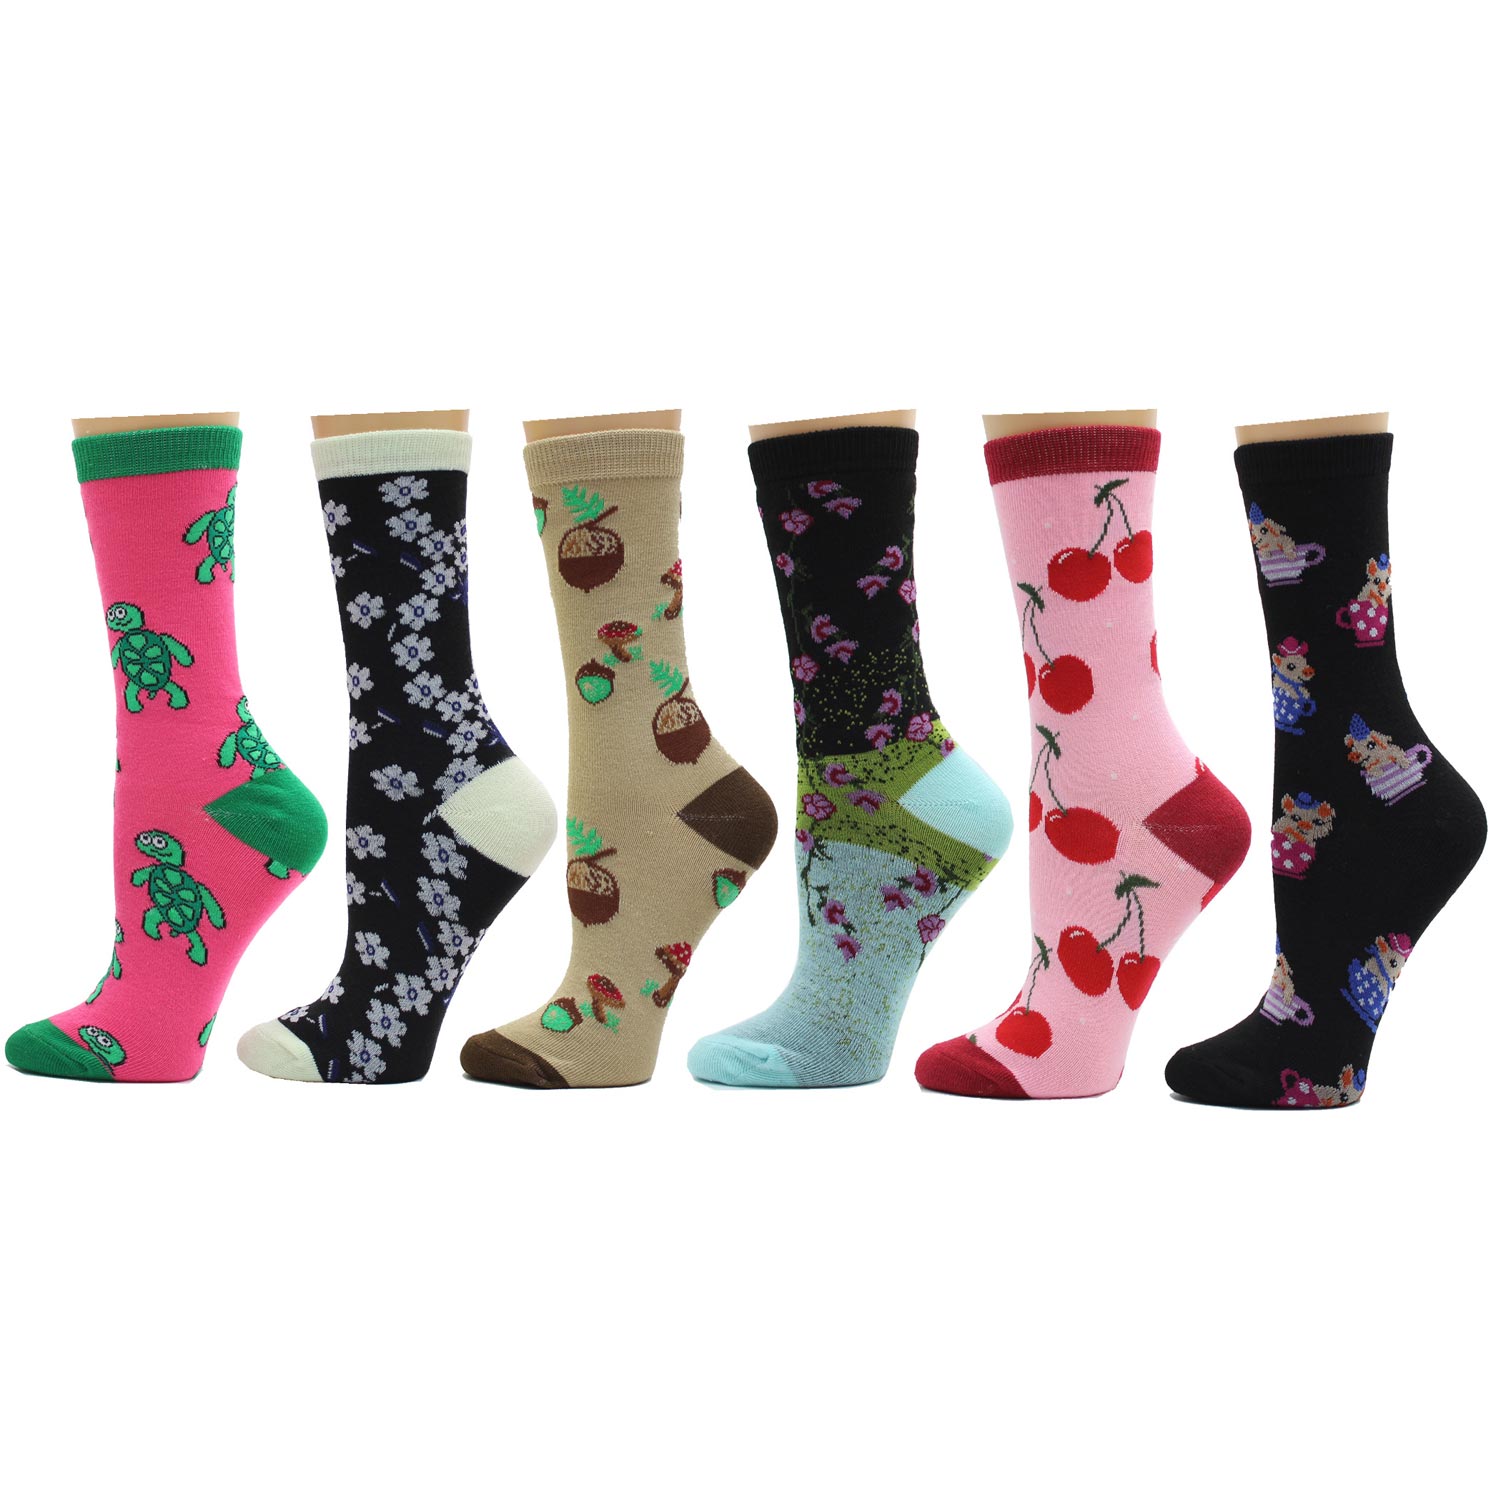 12 Pack Women's Colorful Patterned Socks